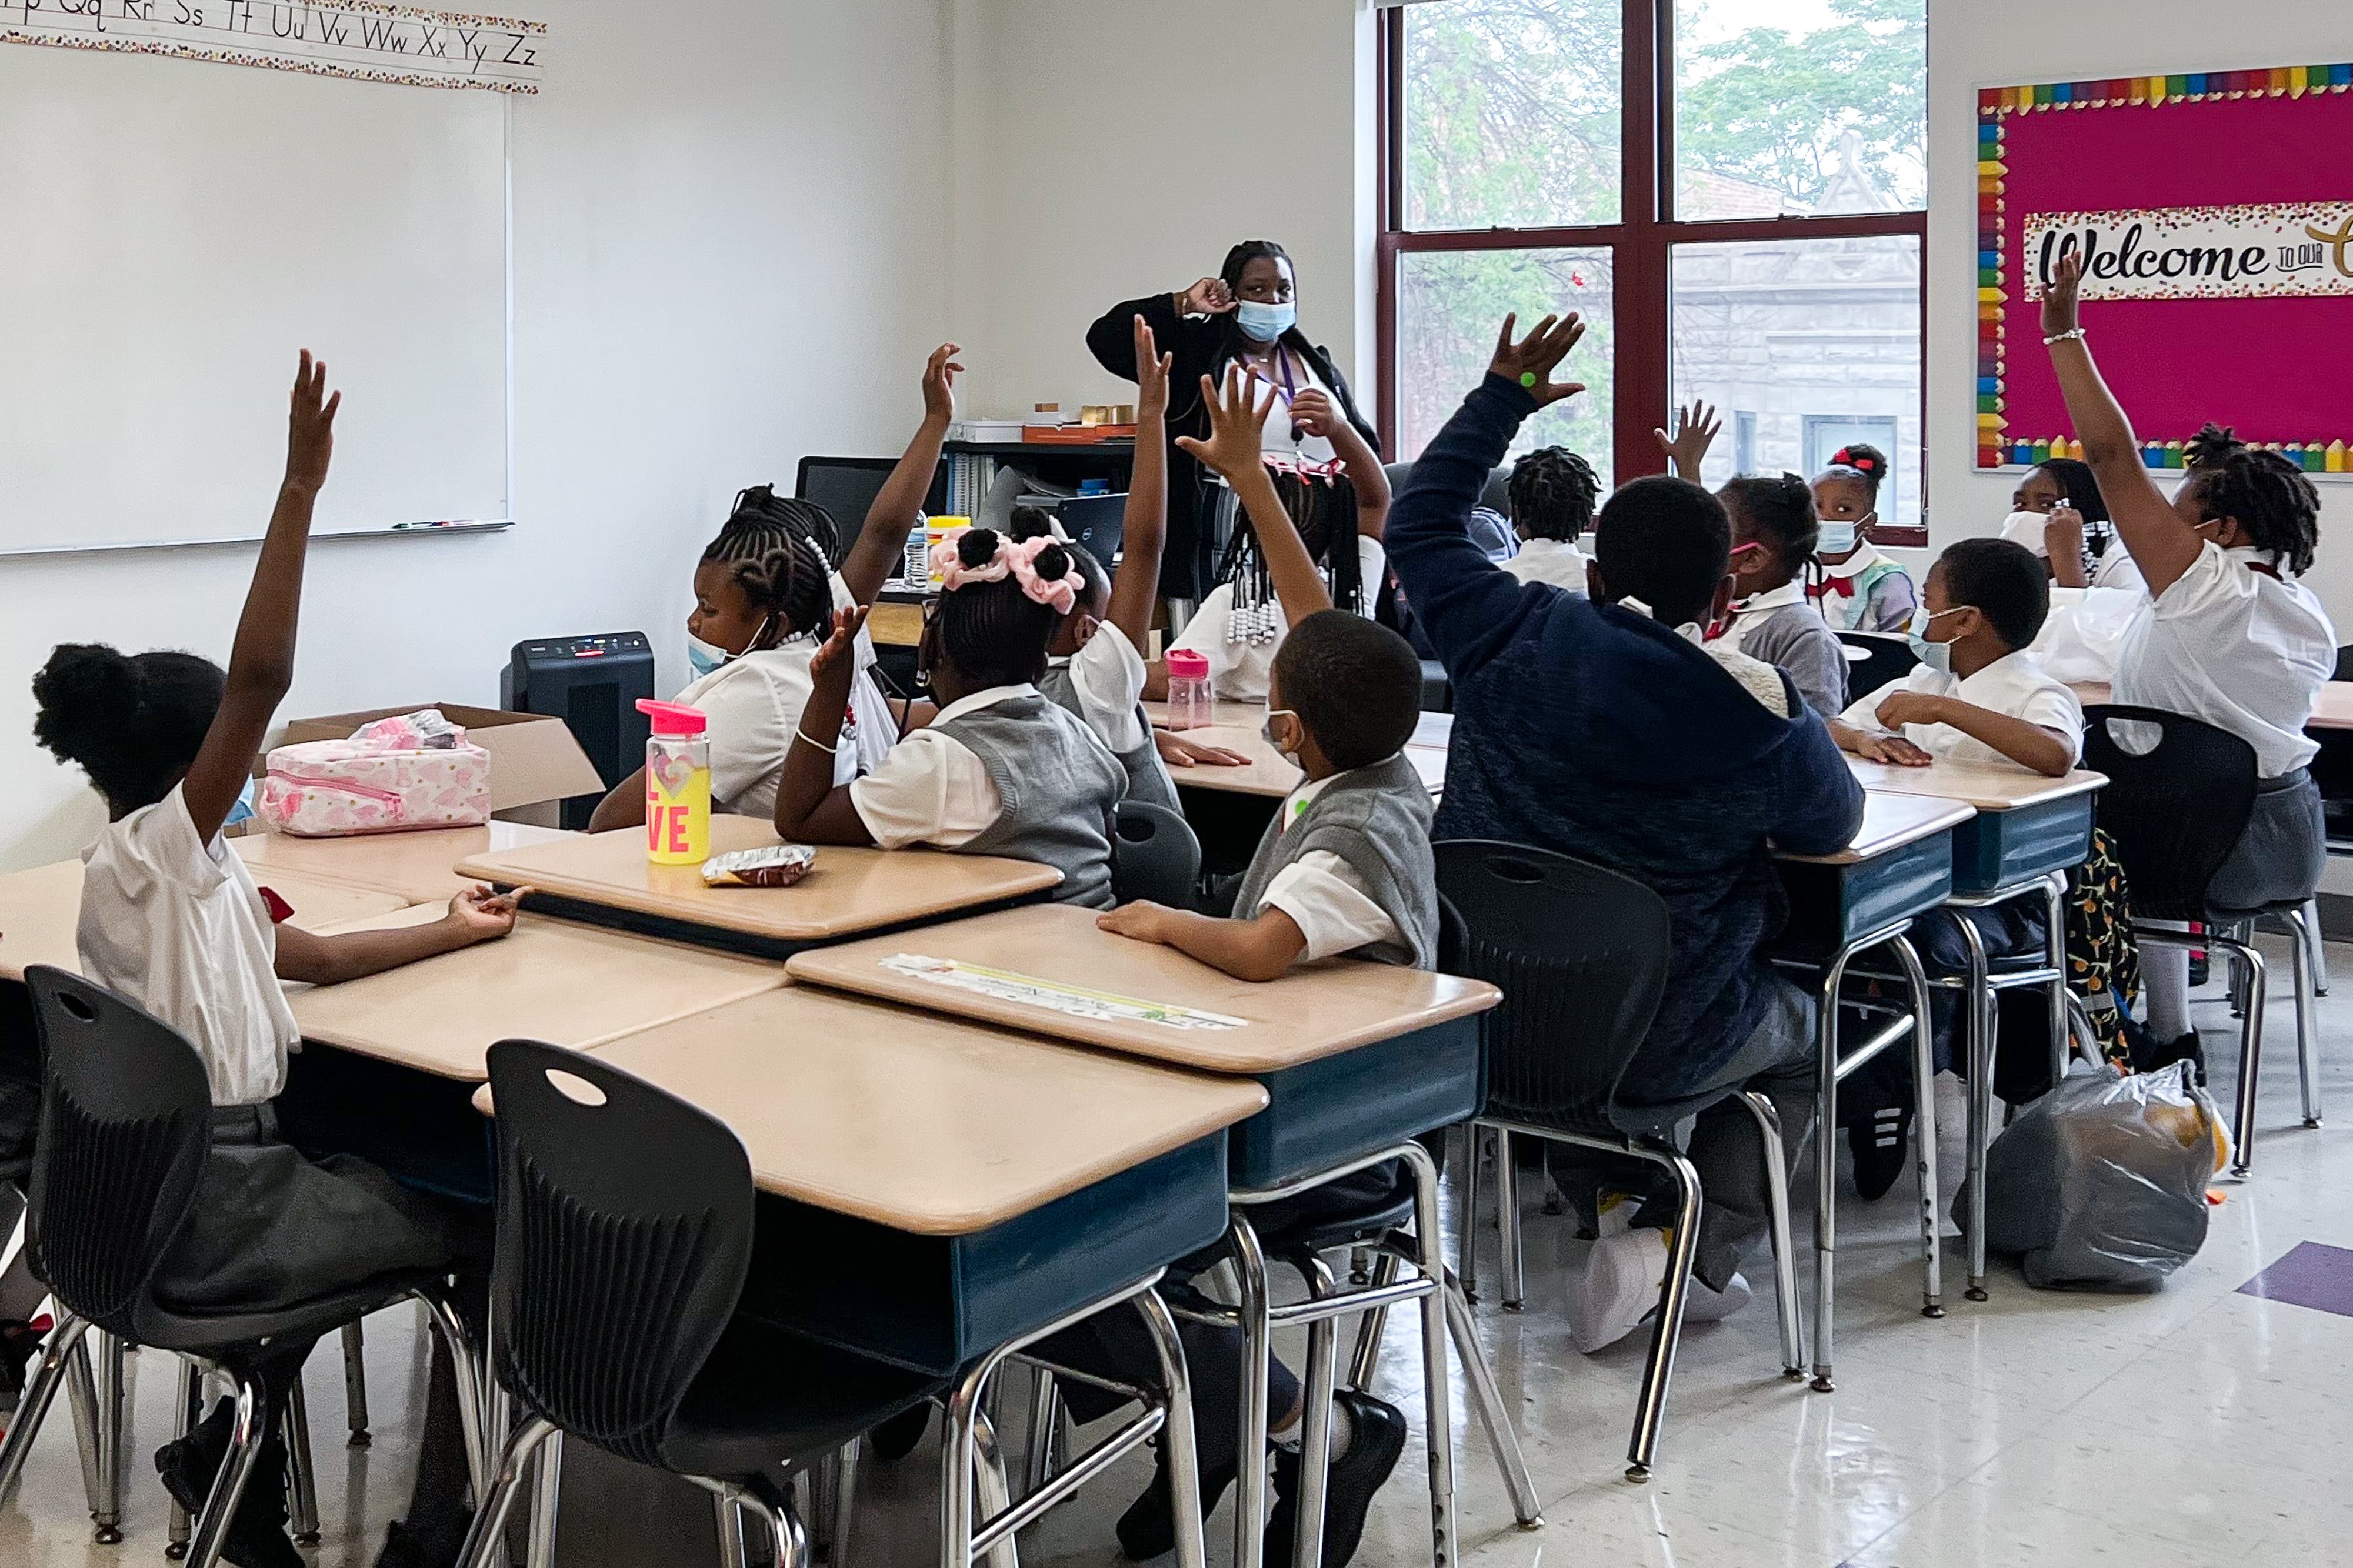 Uniformed students in second grade sitting at desks raise their hands as their teachers looks at them in a classroom. The students and teacher are all wearing masks.